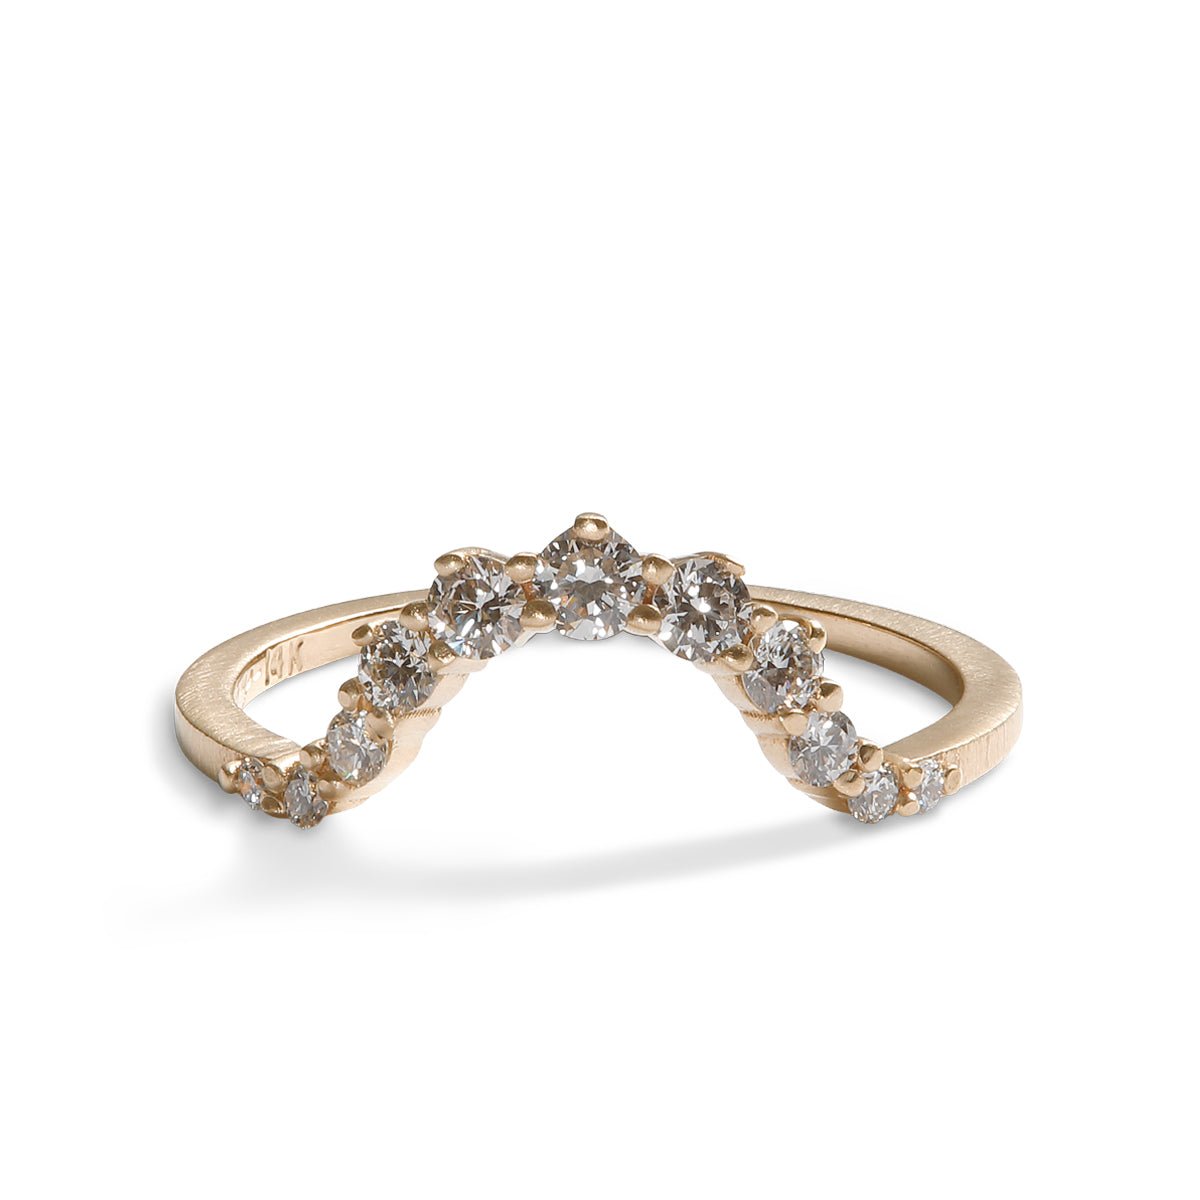 Arched Ortus ring, with prong set lab-grown diamonds. This contoured stacking band is made of 14K recycled gold.